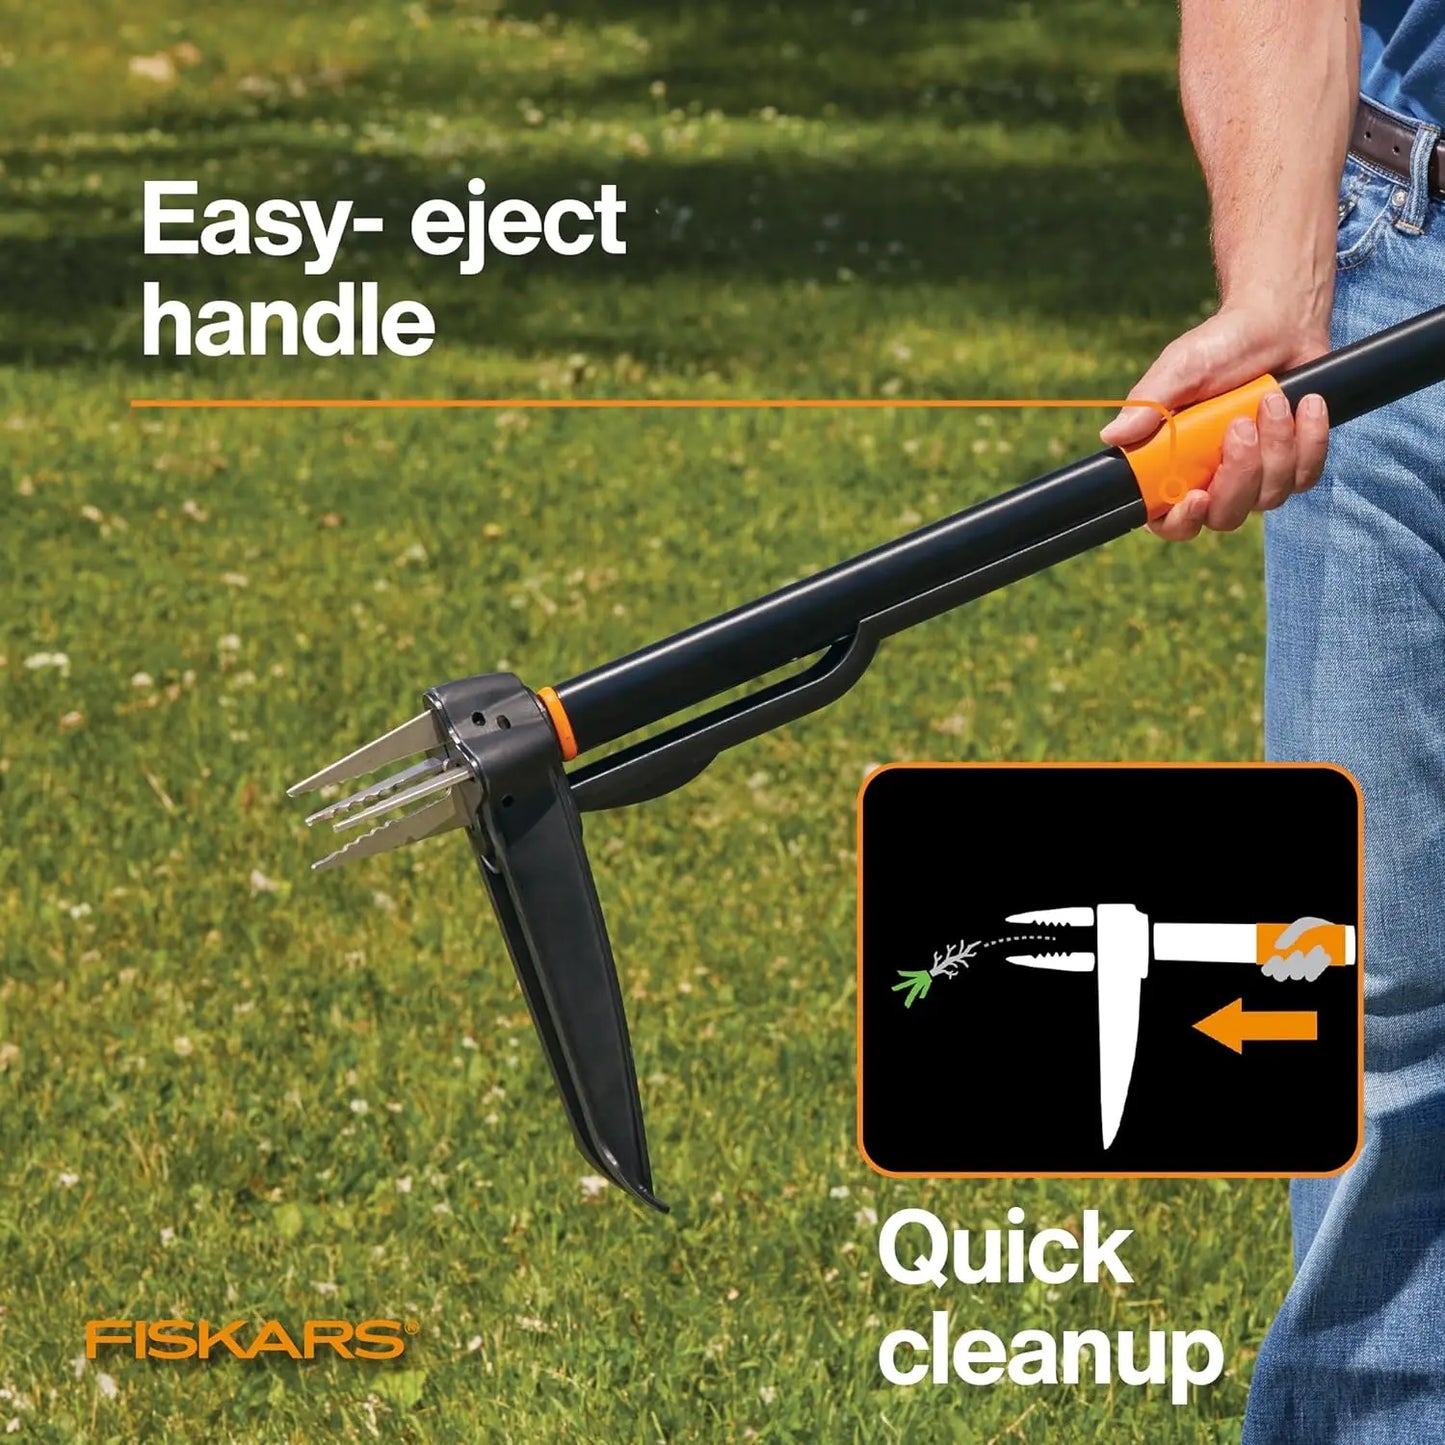 4-Claw Stand Up Weeder - Gardening Hand Weeding Tool with 39" Long Ergonomic Handle - Easy-Eject Mechanism